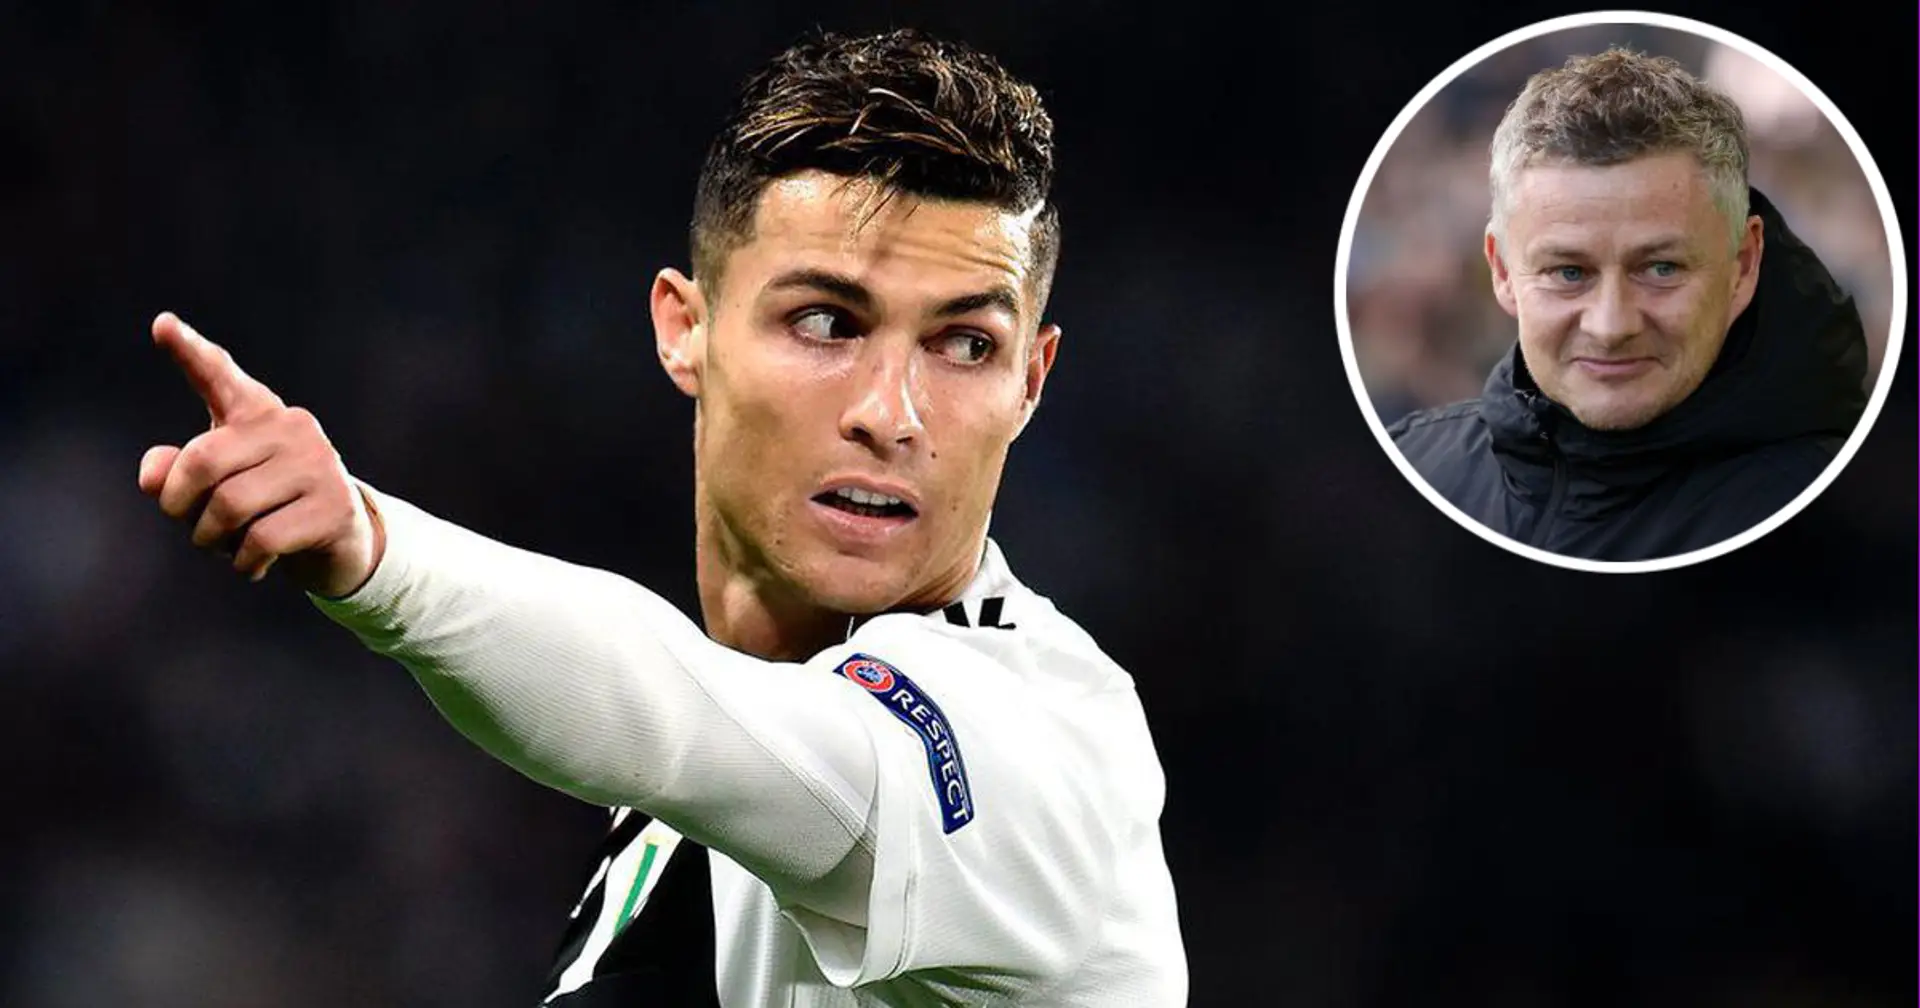 Marca: Cristiano Ronaldo could leave Juventus amid Covid-19 pandemic, Man United return a possible option